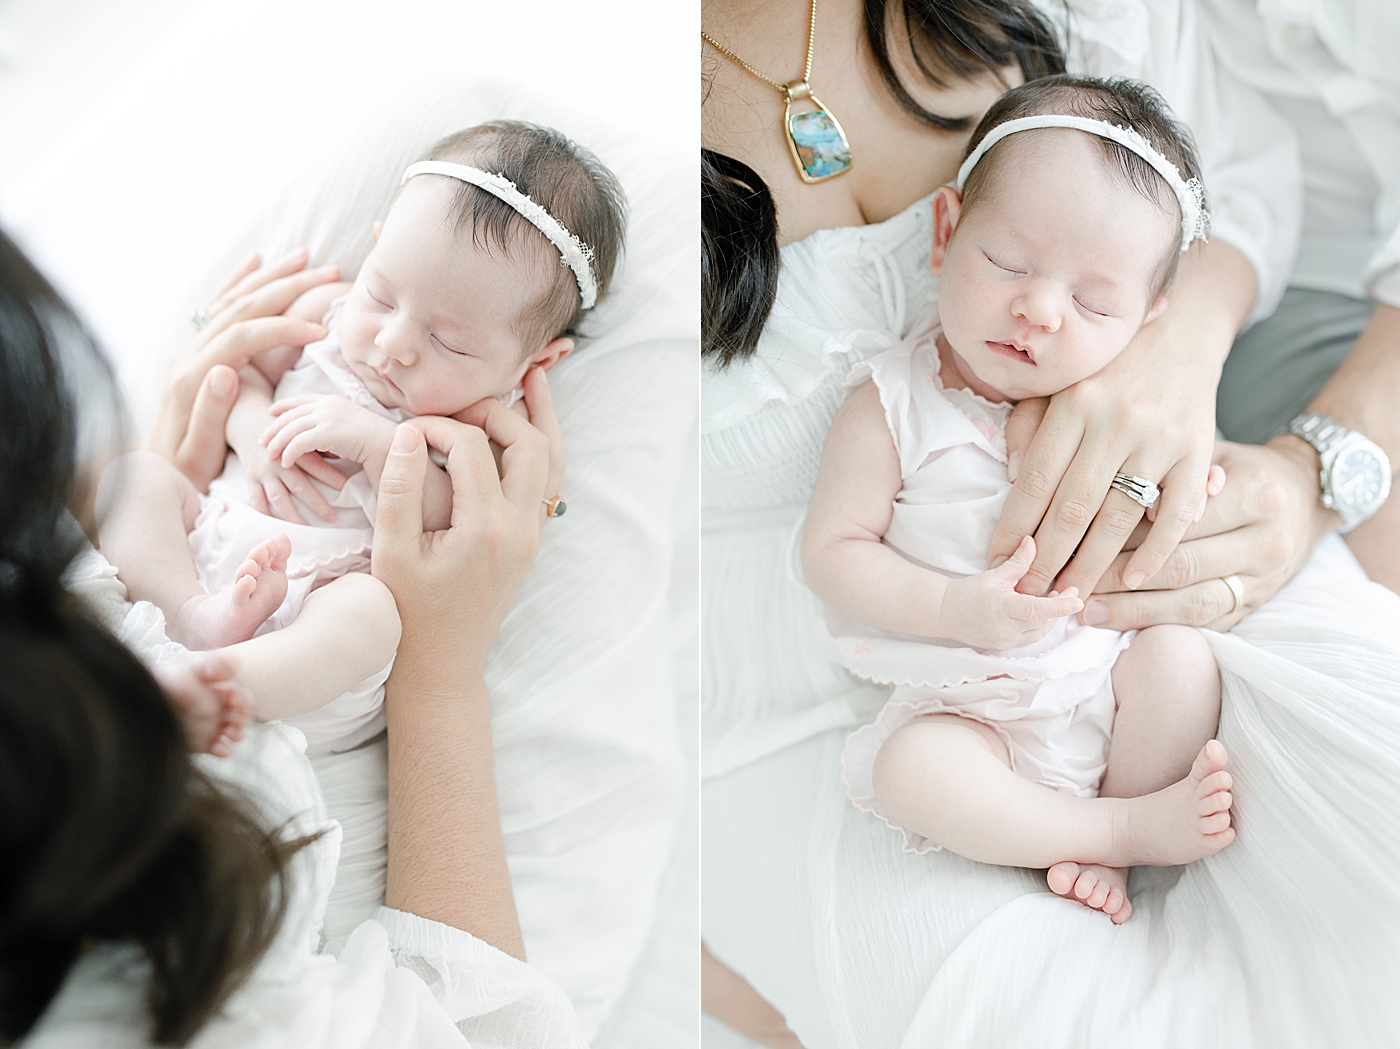 Newborn baby girl wearing heirloom outfit for photos with Little Sunshine Photography.